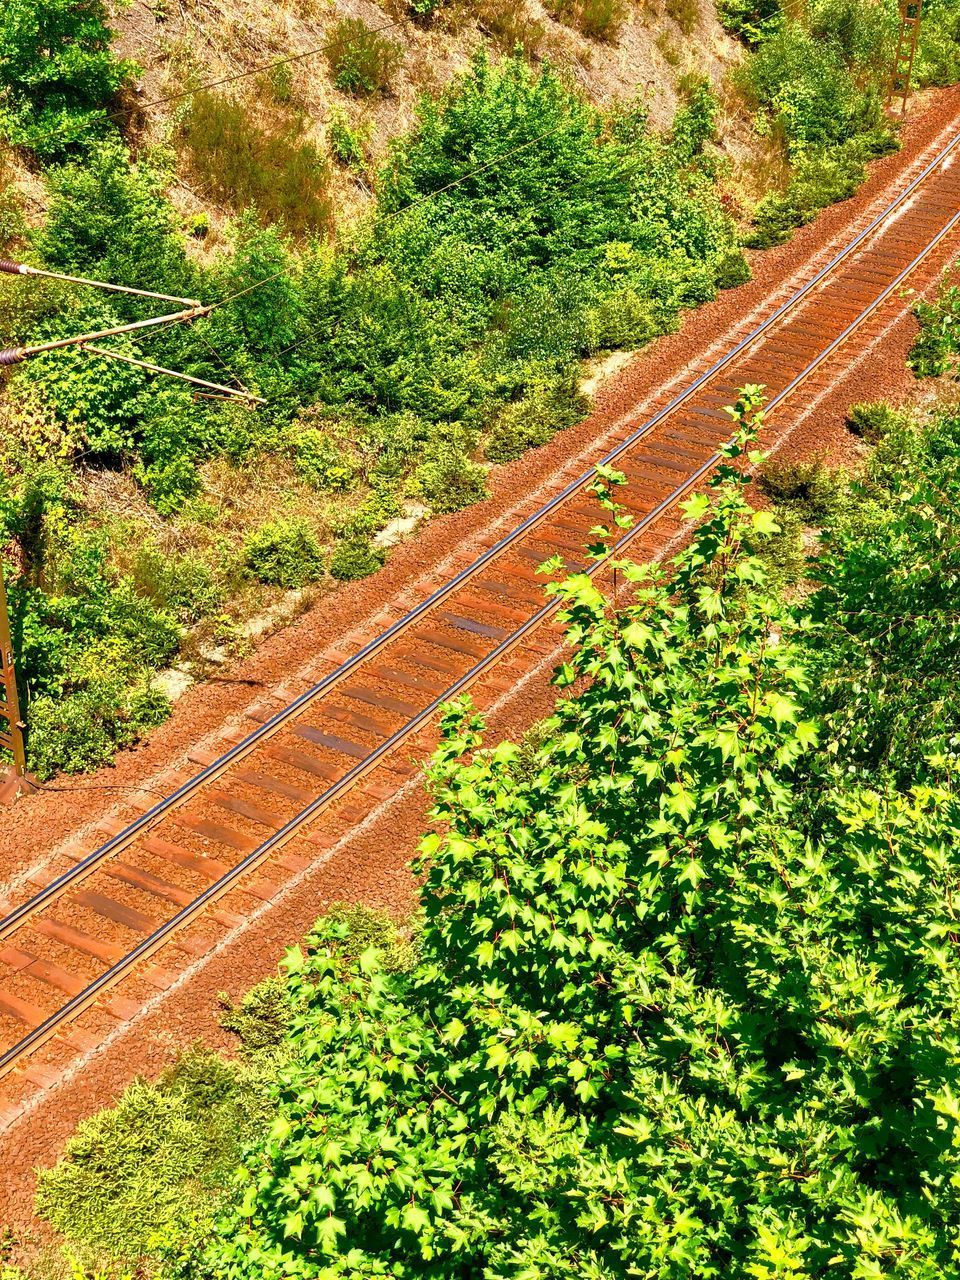 HIGH ANGLE VIEW OF RAILROAD TRACK AMIDST TREES